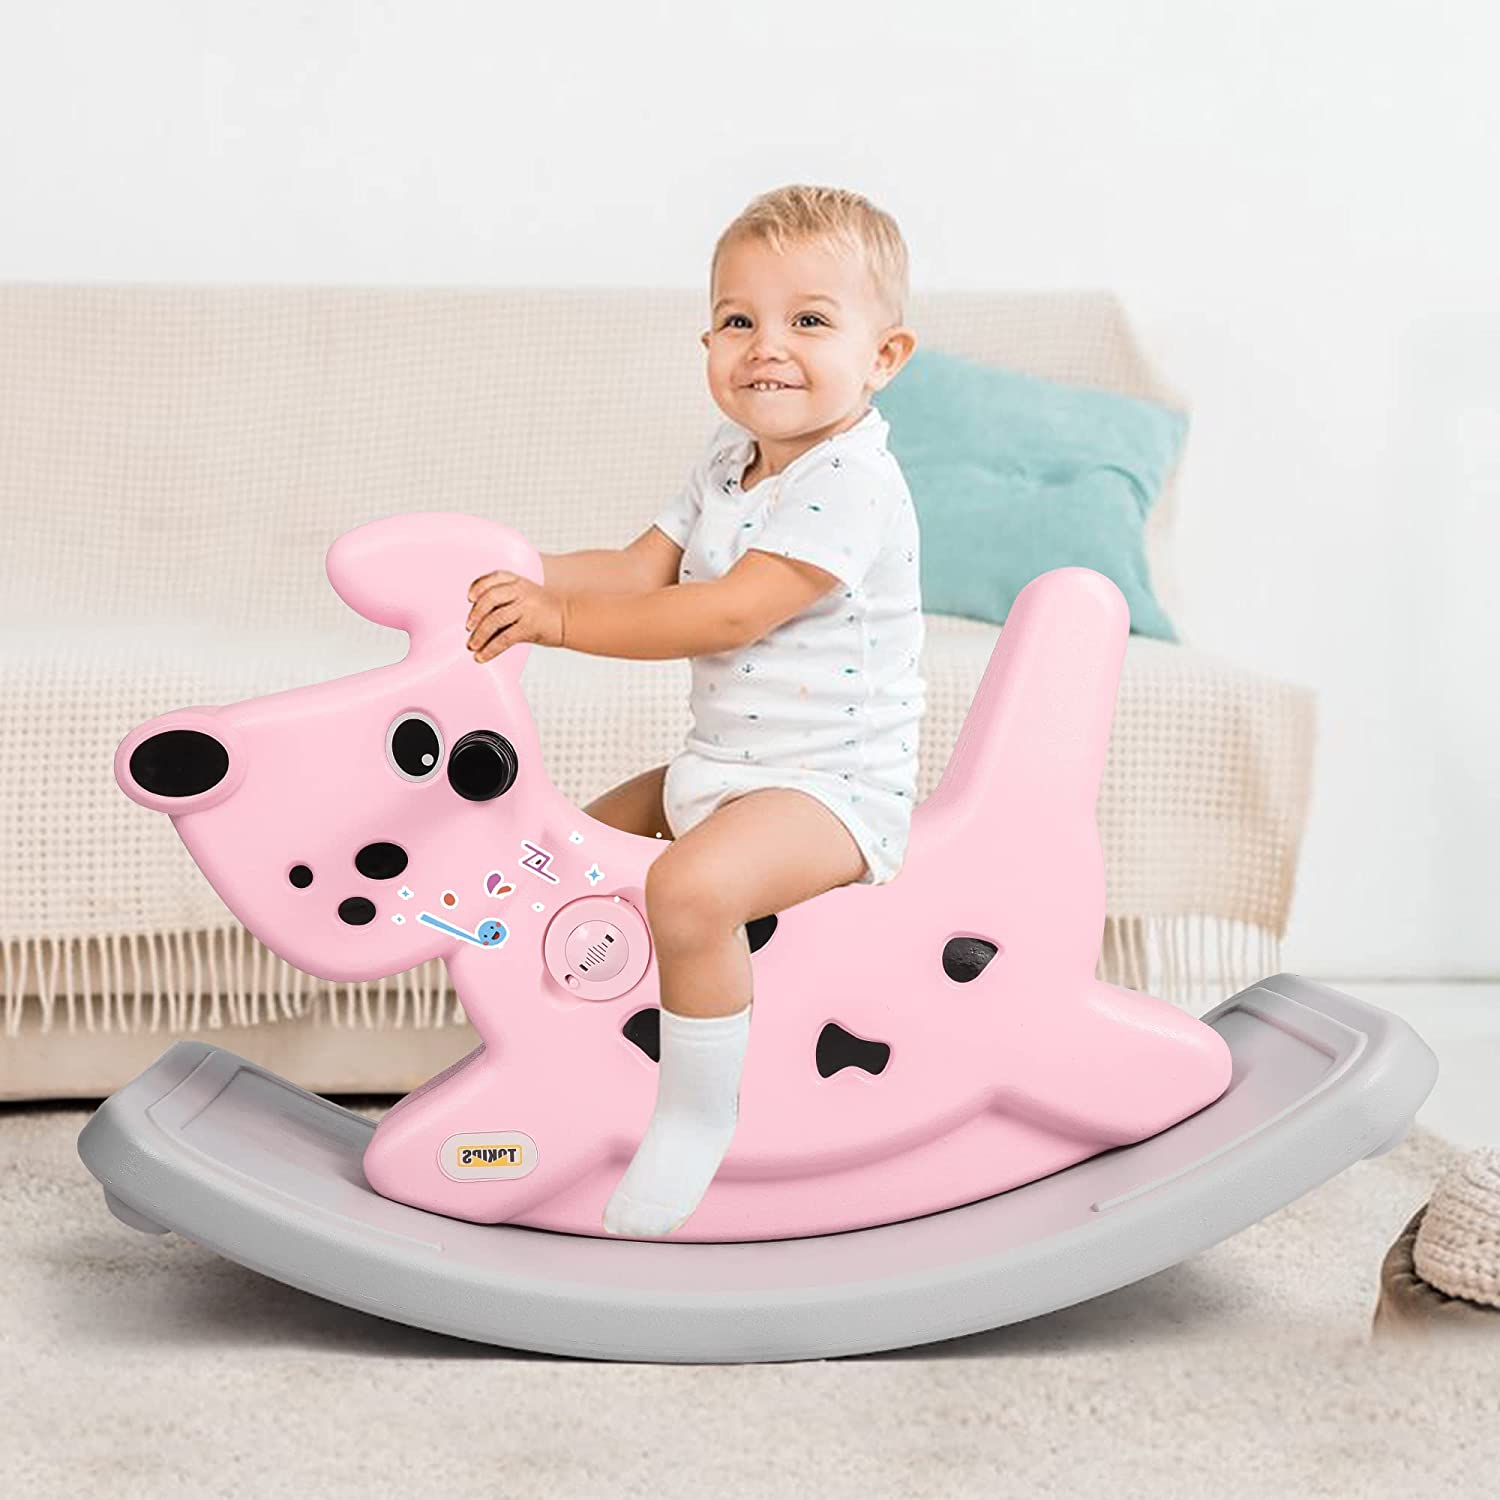 Rocking Horse Outdoor Rocking Toy with Music for Toddler Baby Kids Ages 1-3 Year Old Boy Girl Pink